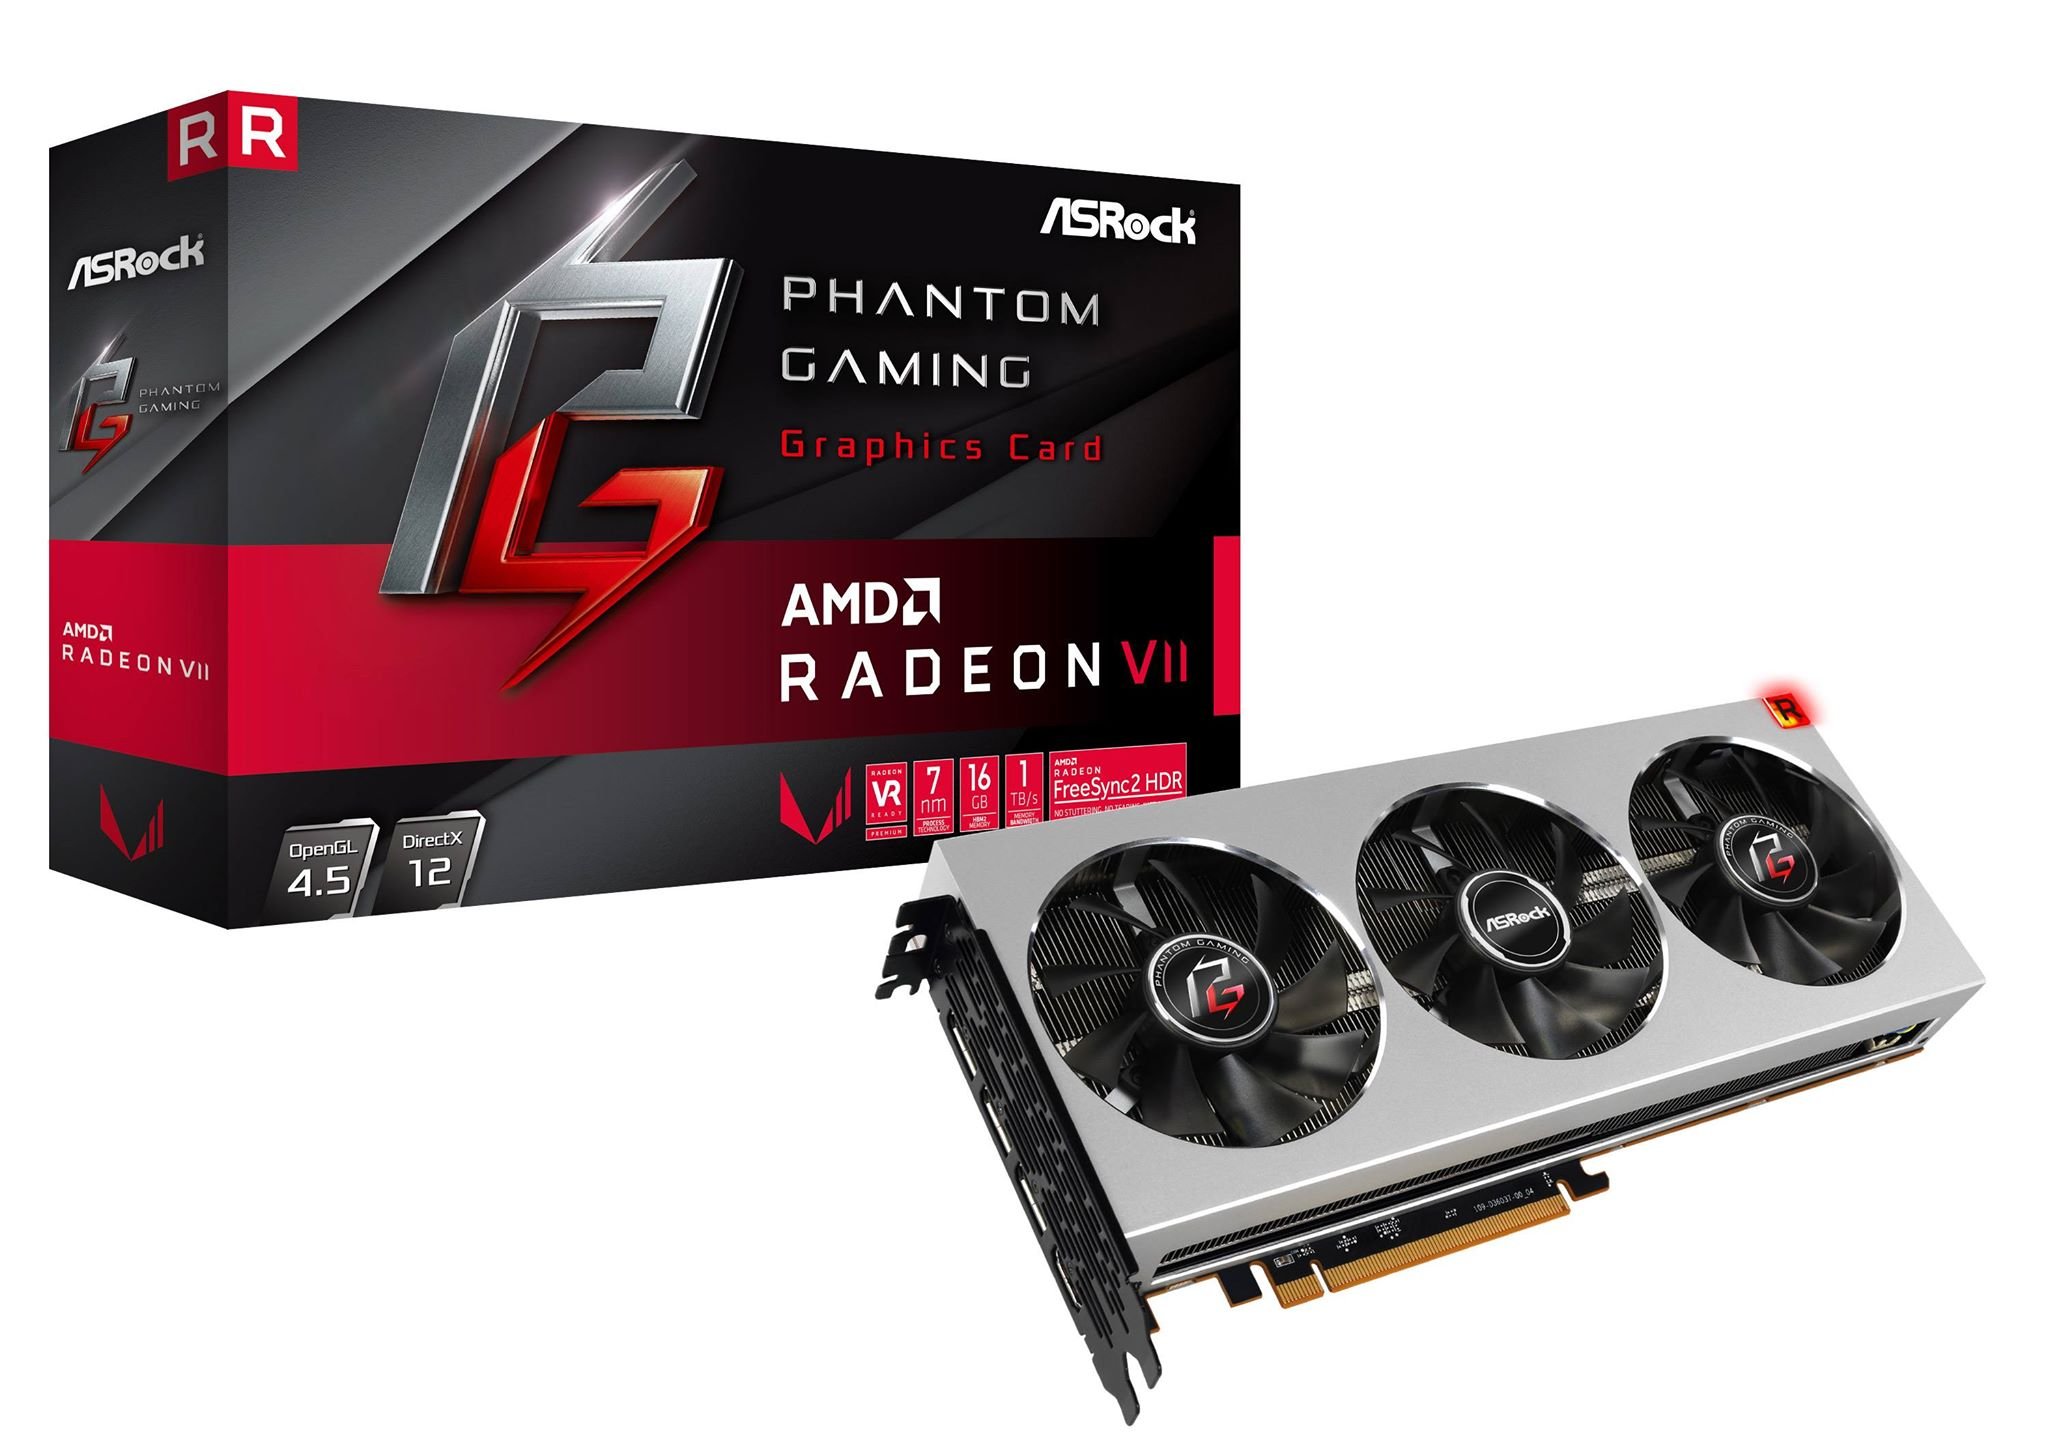 Media asset in full size related to 3dfxzone.it news item entitled as follows: Foto ufficiale della video card Radeon VII Phantom Gaming di ASRock | Image Name: news29187_ASRock-Radeon-VII-Phantom-Gaming_1.jpg